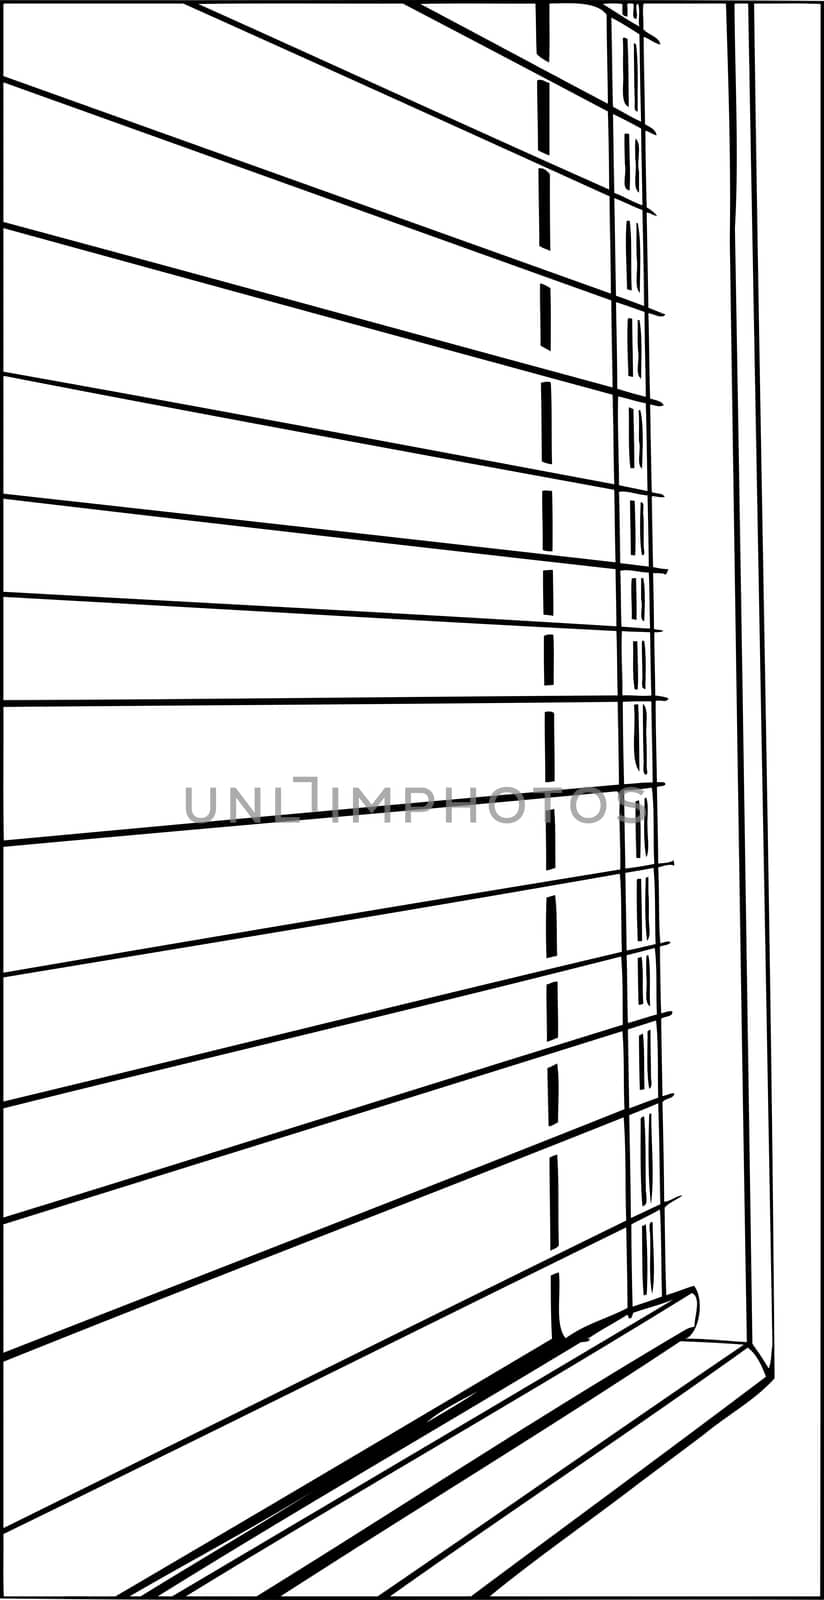 Outline close up of open blinds and window